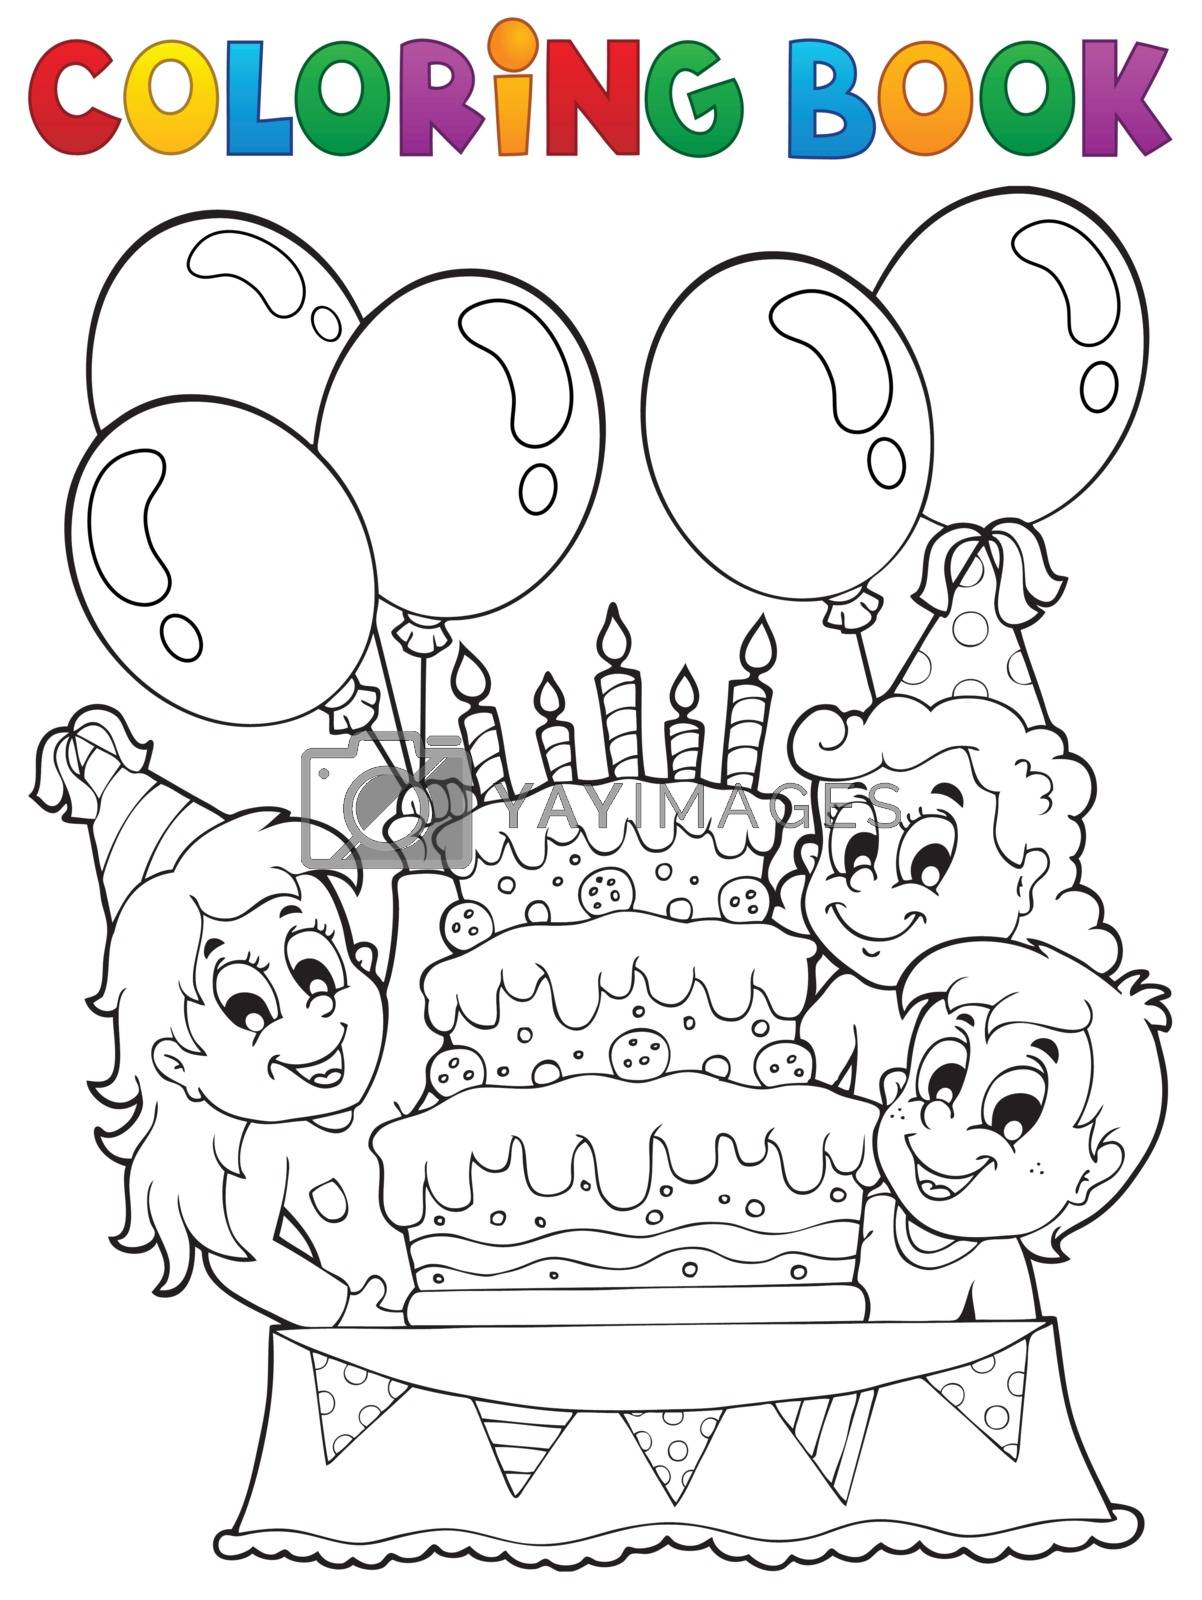 Royalty free image of Coloring book kids party theme 2 by clairev